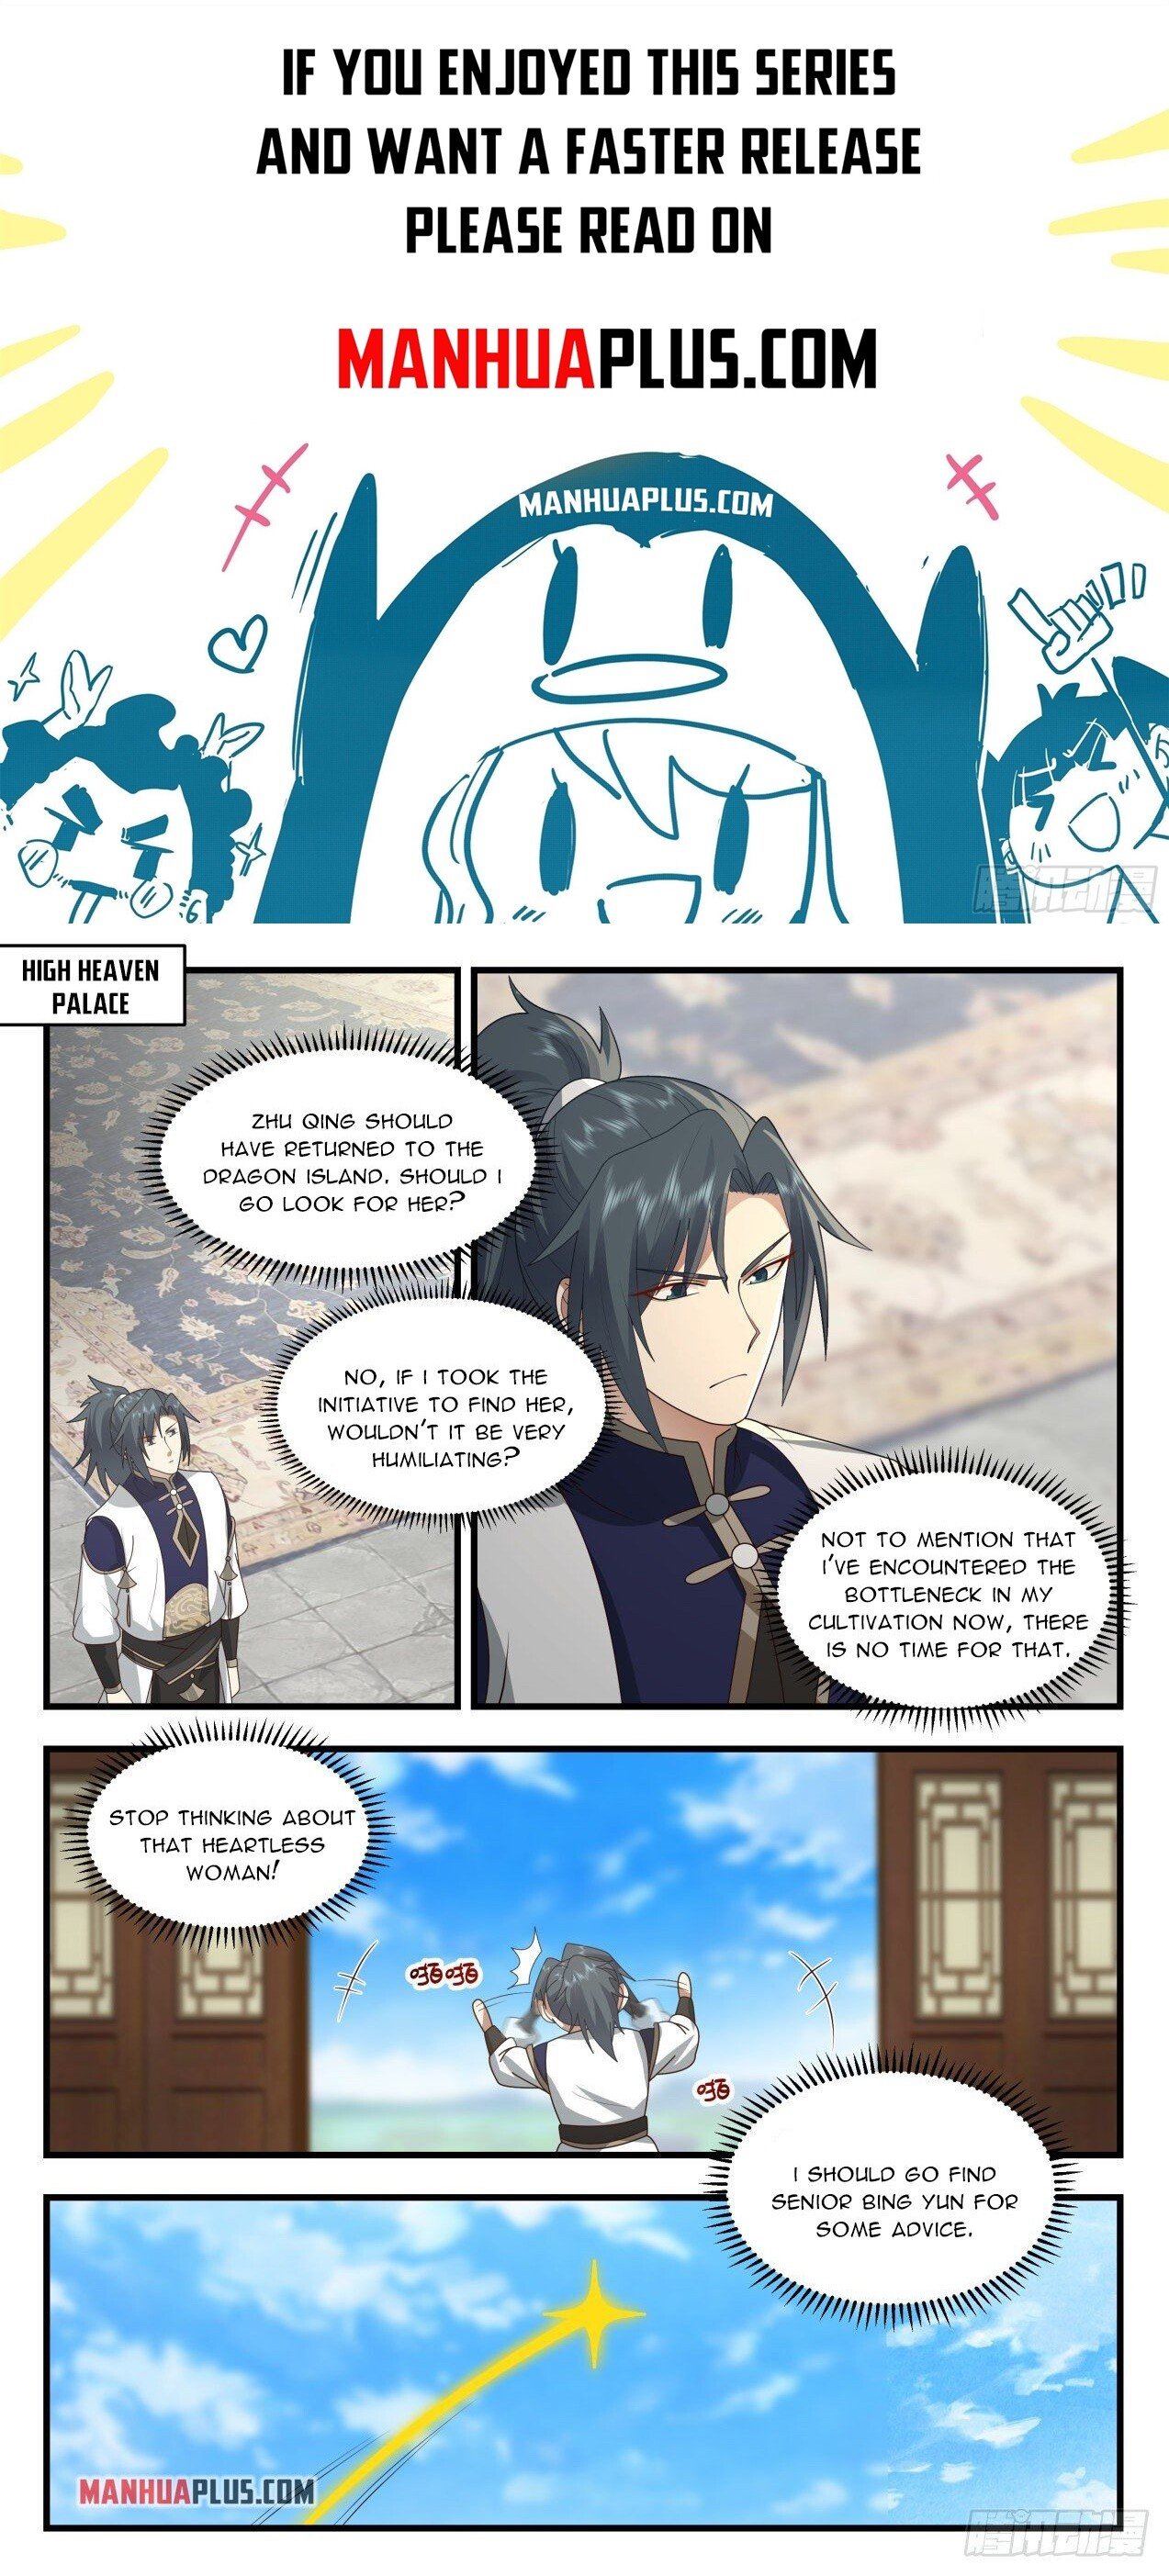 Martial Peak - Chapter 14148 - Follow your heart - Image 1